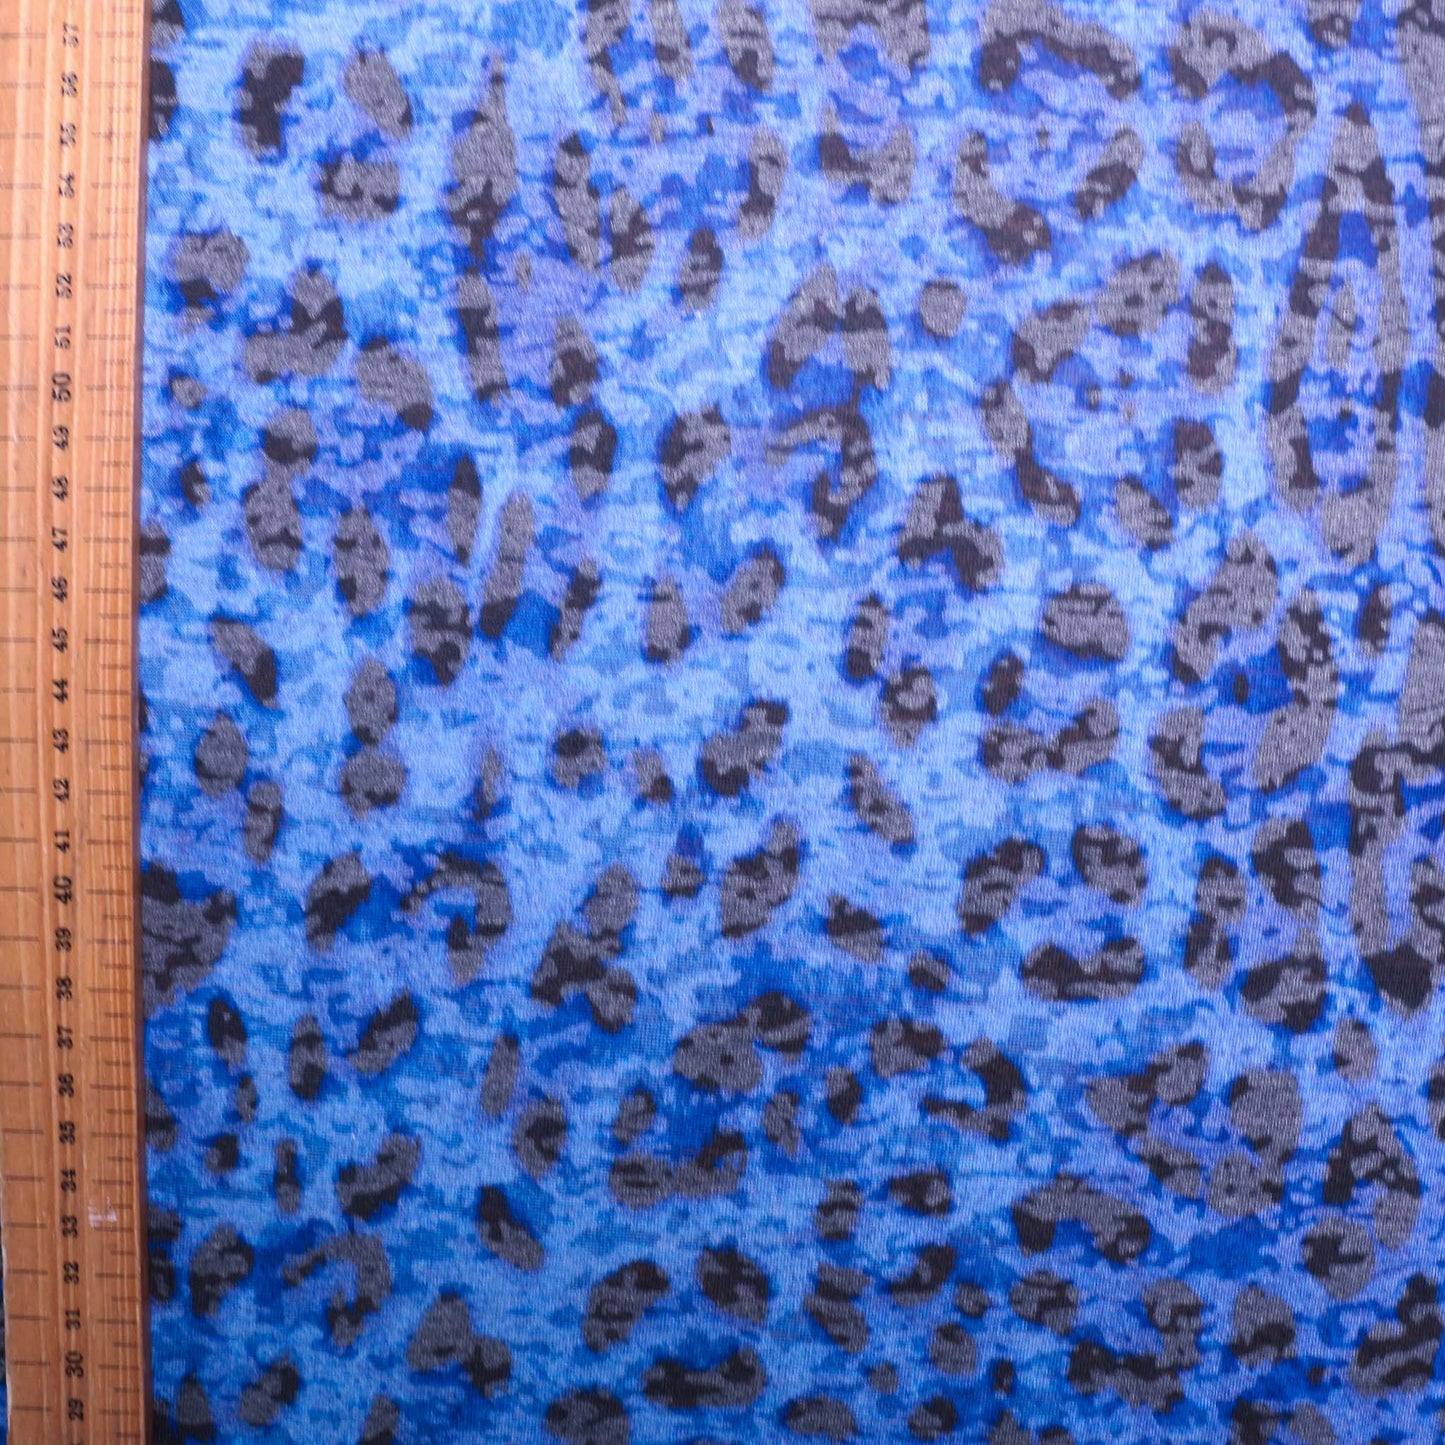 metre blue jersey knit stretchy dressmaking fabric with animal print